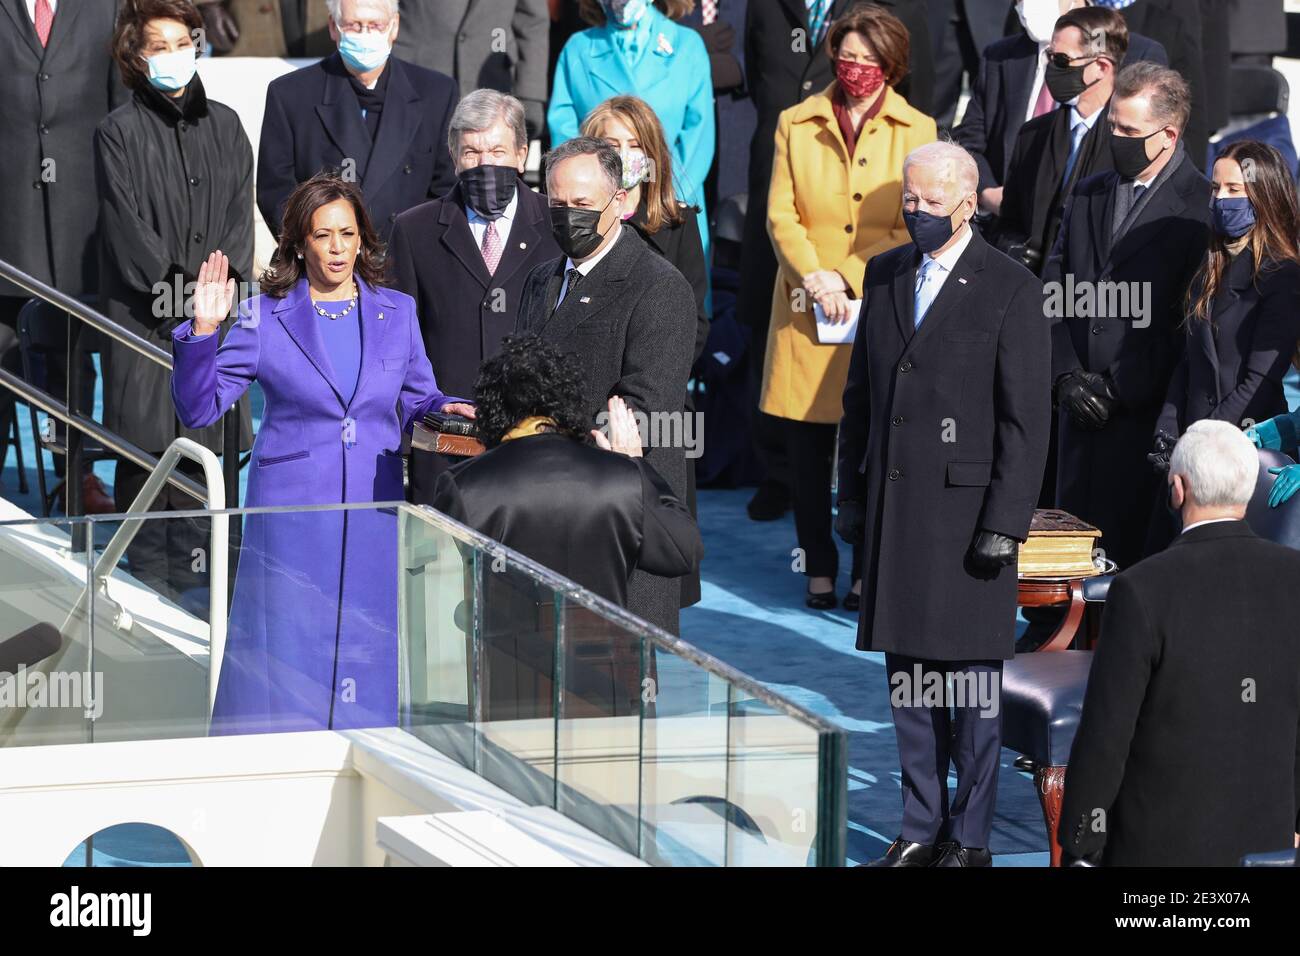 Washington, USA. 20th Jan, 2021.Vice President-elect Kamala Harris takes the Oath of Office to become the Vice President of the United States as she is sworn-in by Supreme Court Justice Sonia Sotomayor during the Inauguration Day ceremony of Joe Biden held at the U.S. Capitol Building in Washington, D.C. on Jan. 20, 2021. (Photo by Oliver Contreras/Sipa USA) Stock Photo